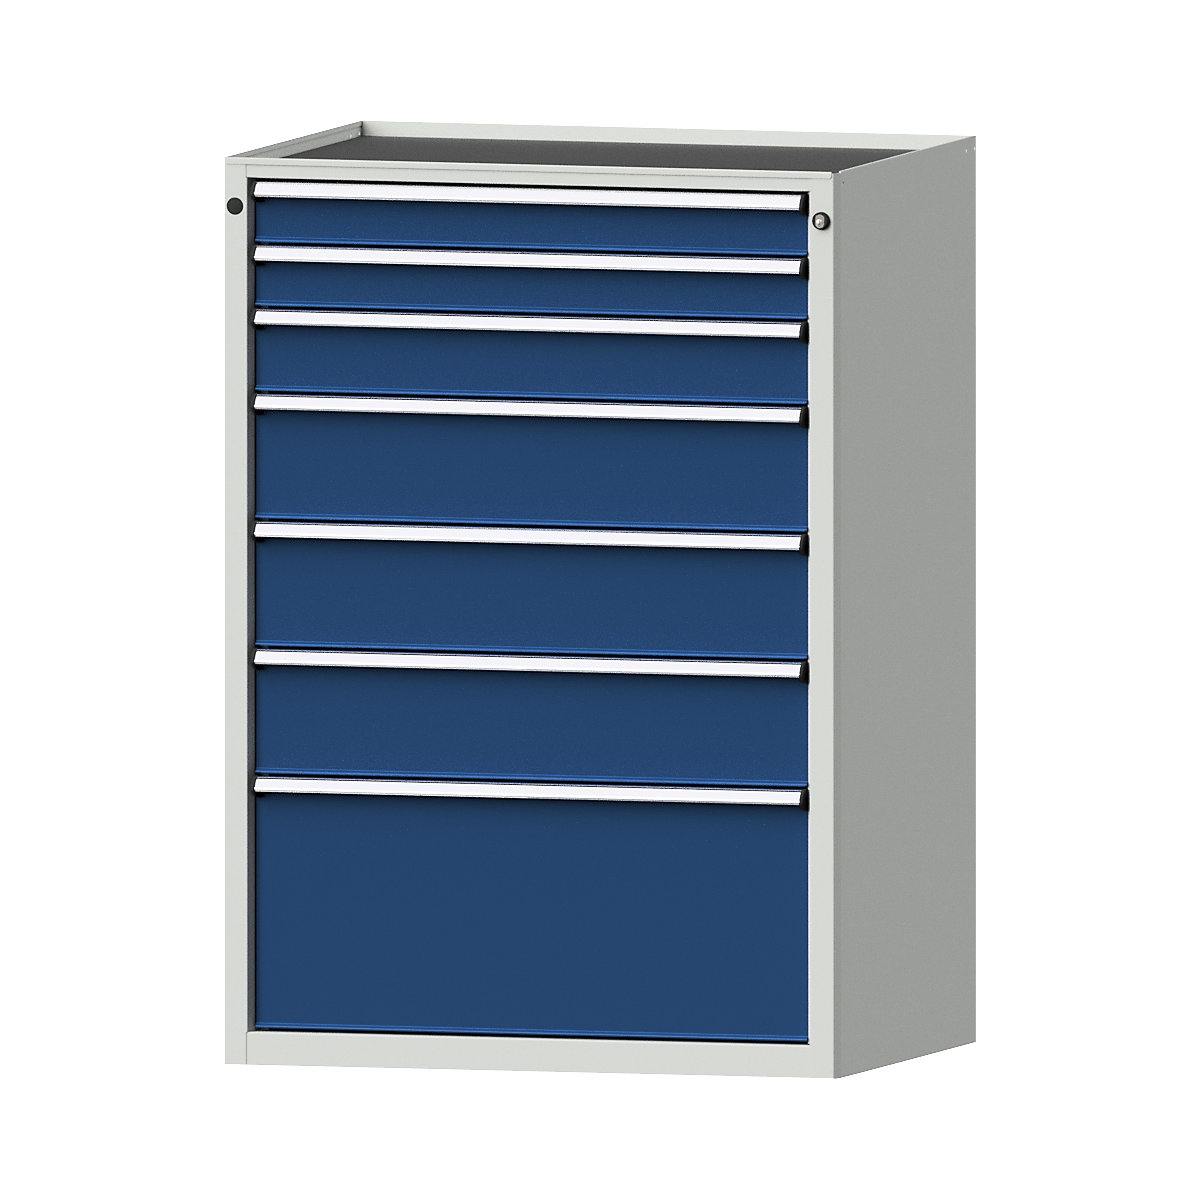 Drawer cupboard – ANKE, WxD 910 x 675 mm, 7 drawers, height 1280 mm, front in gentian blue-16